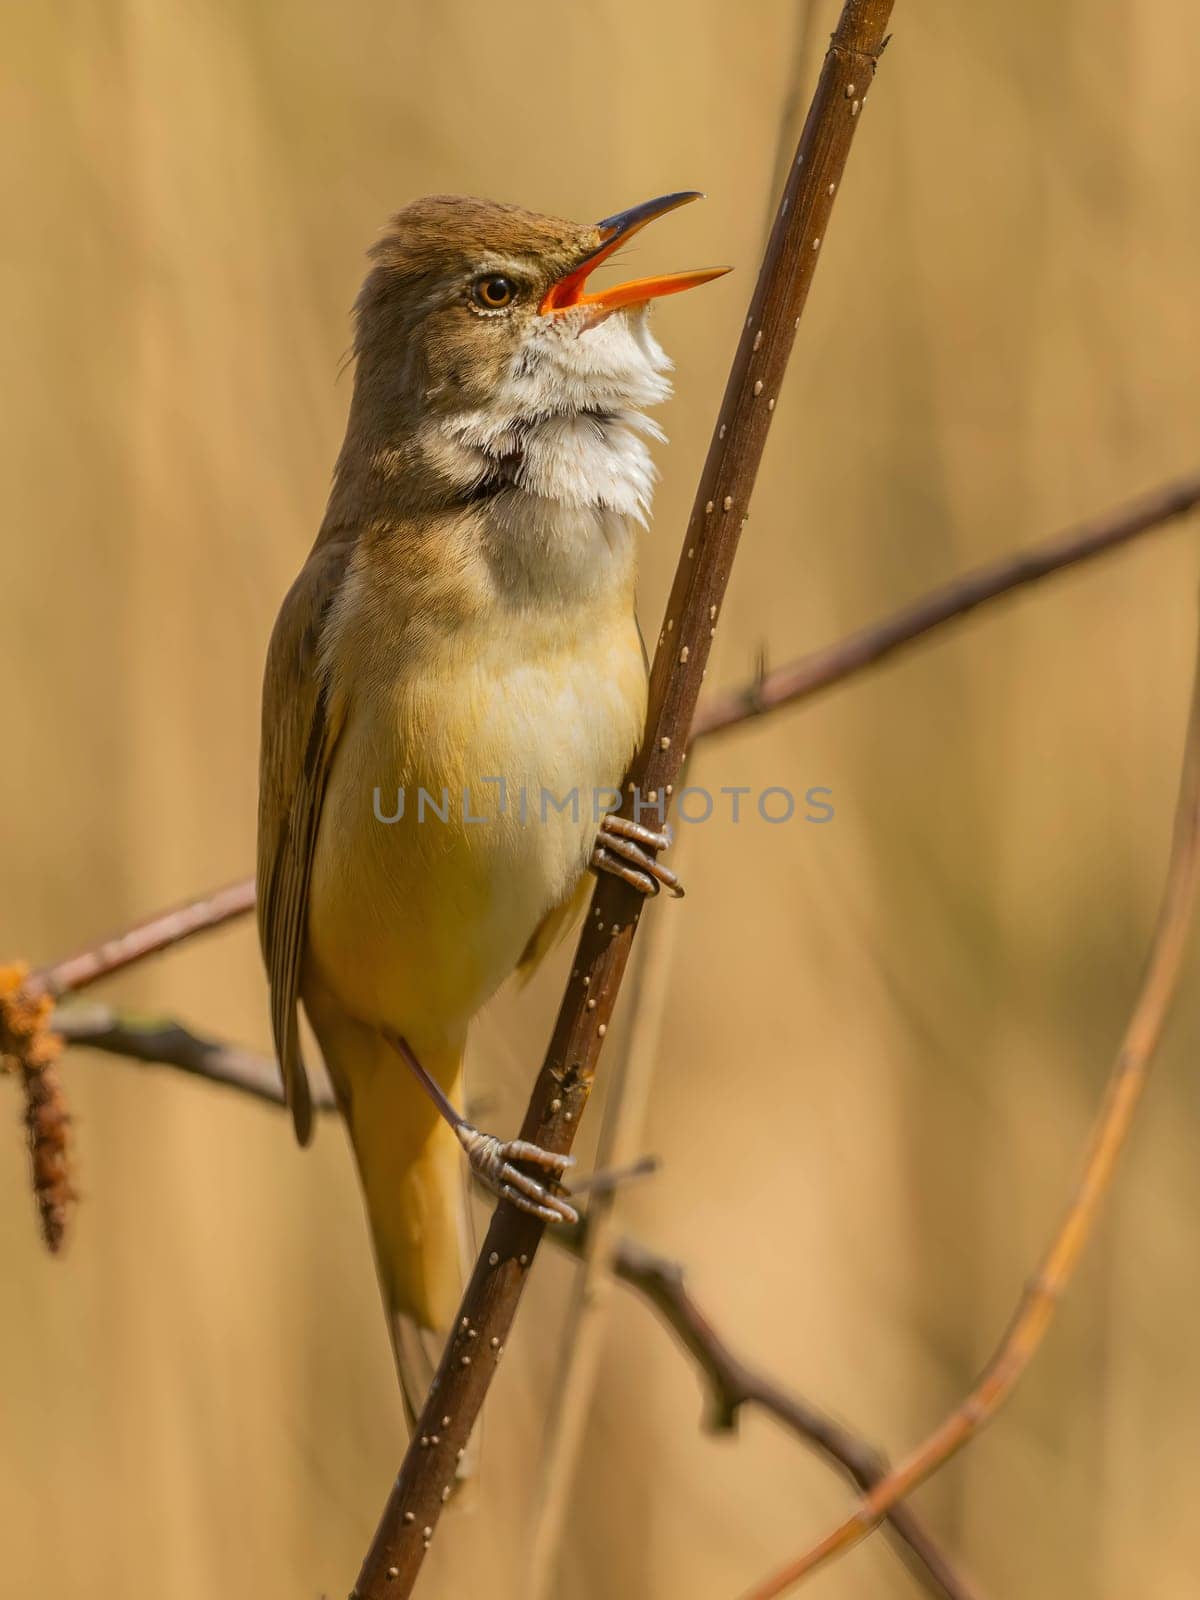 Close-up photograph of a Great Reed Warbler on a twig against a bright background.